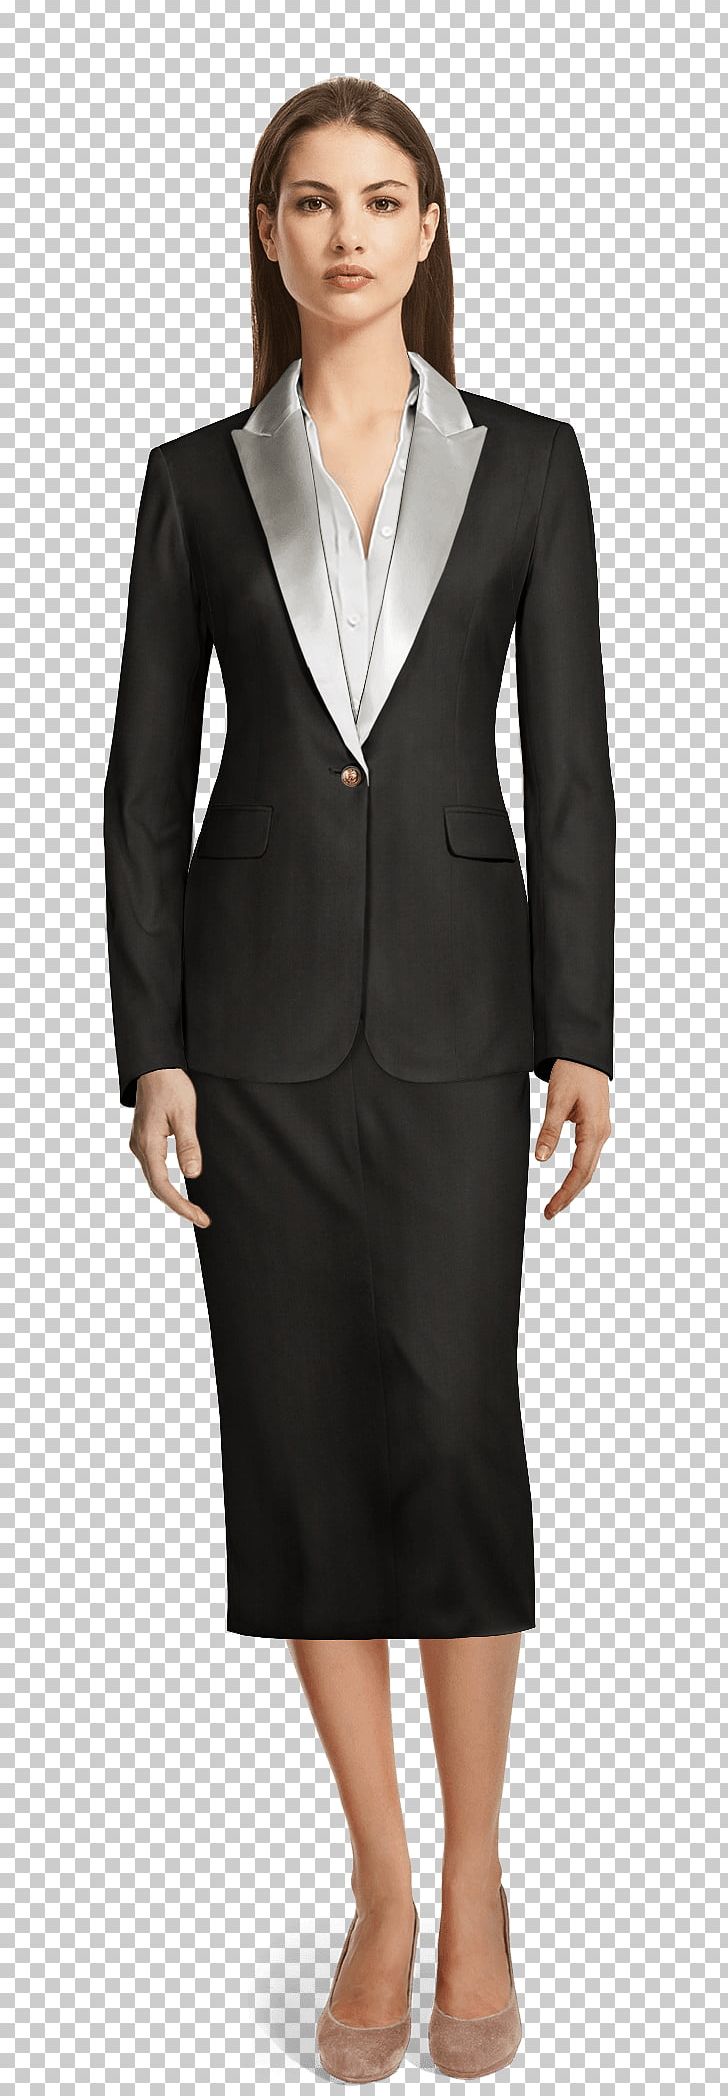 Tuxedo Lapel Suit Double-breasted Single-breasted PNG, Clipart, Black ...